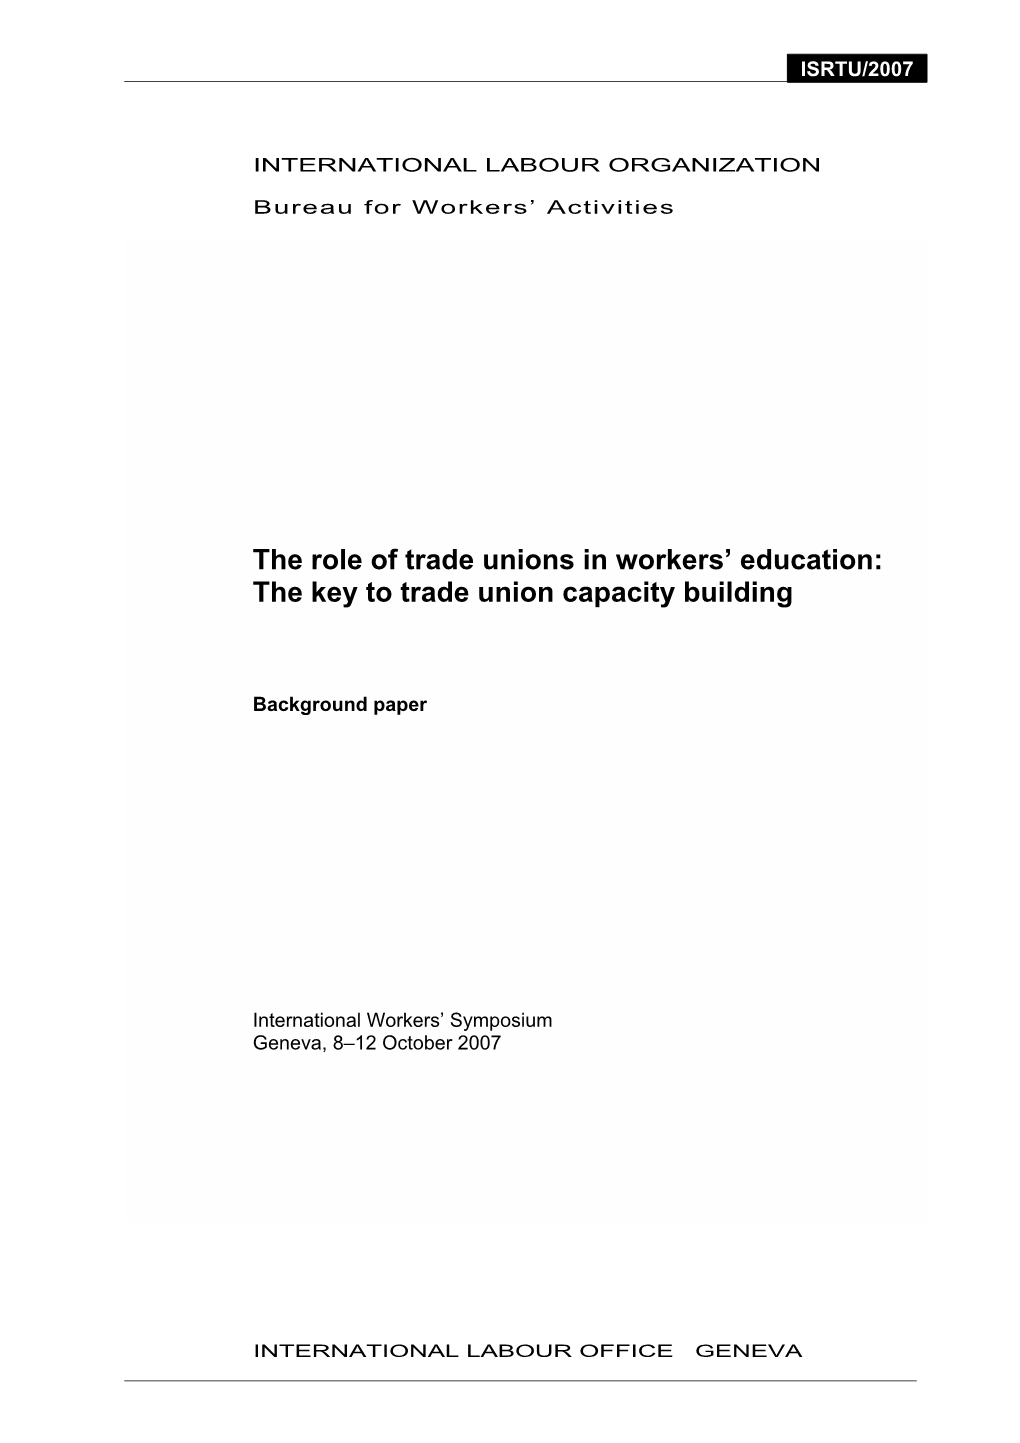 The Role of Trade Unions in Workers' Education